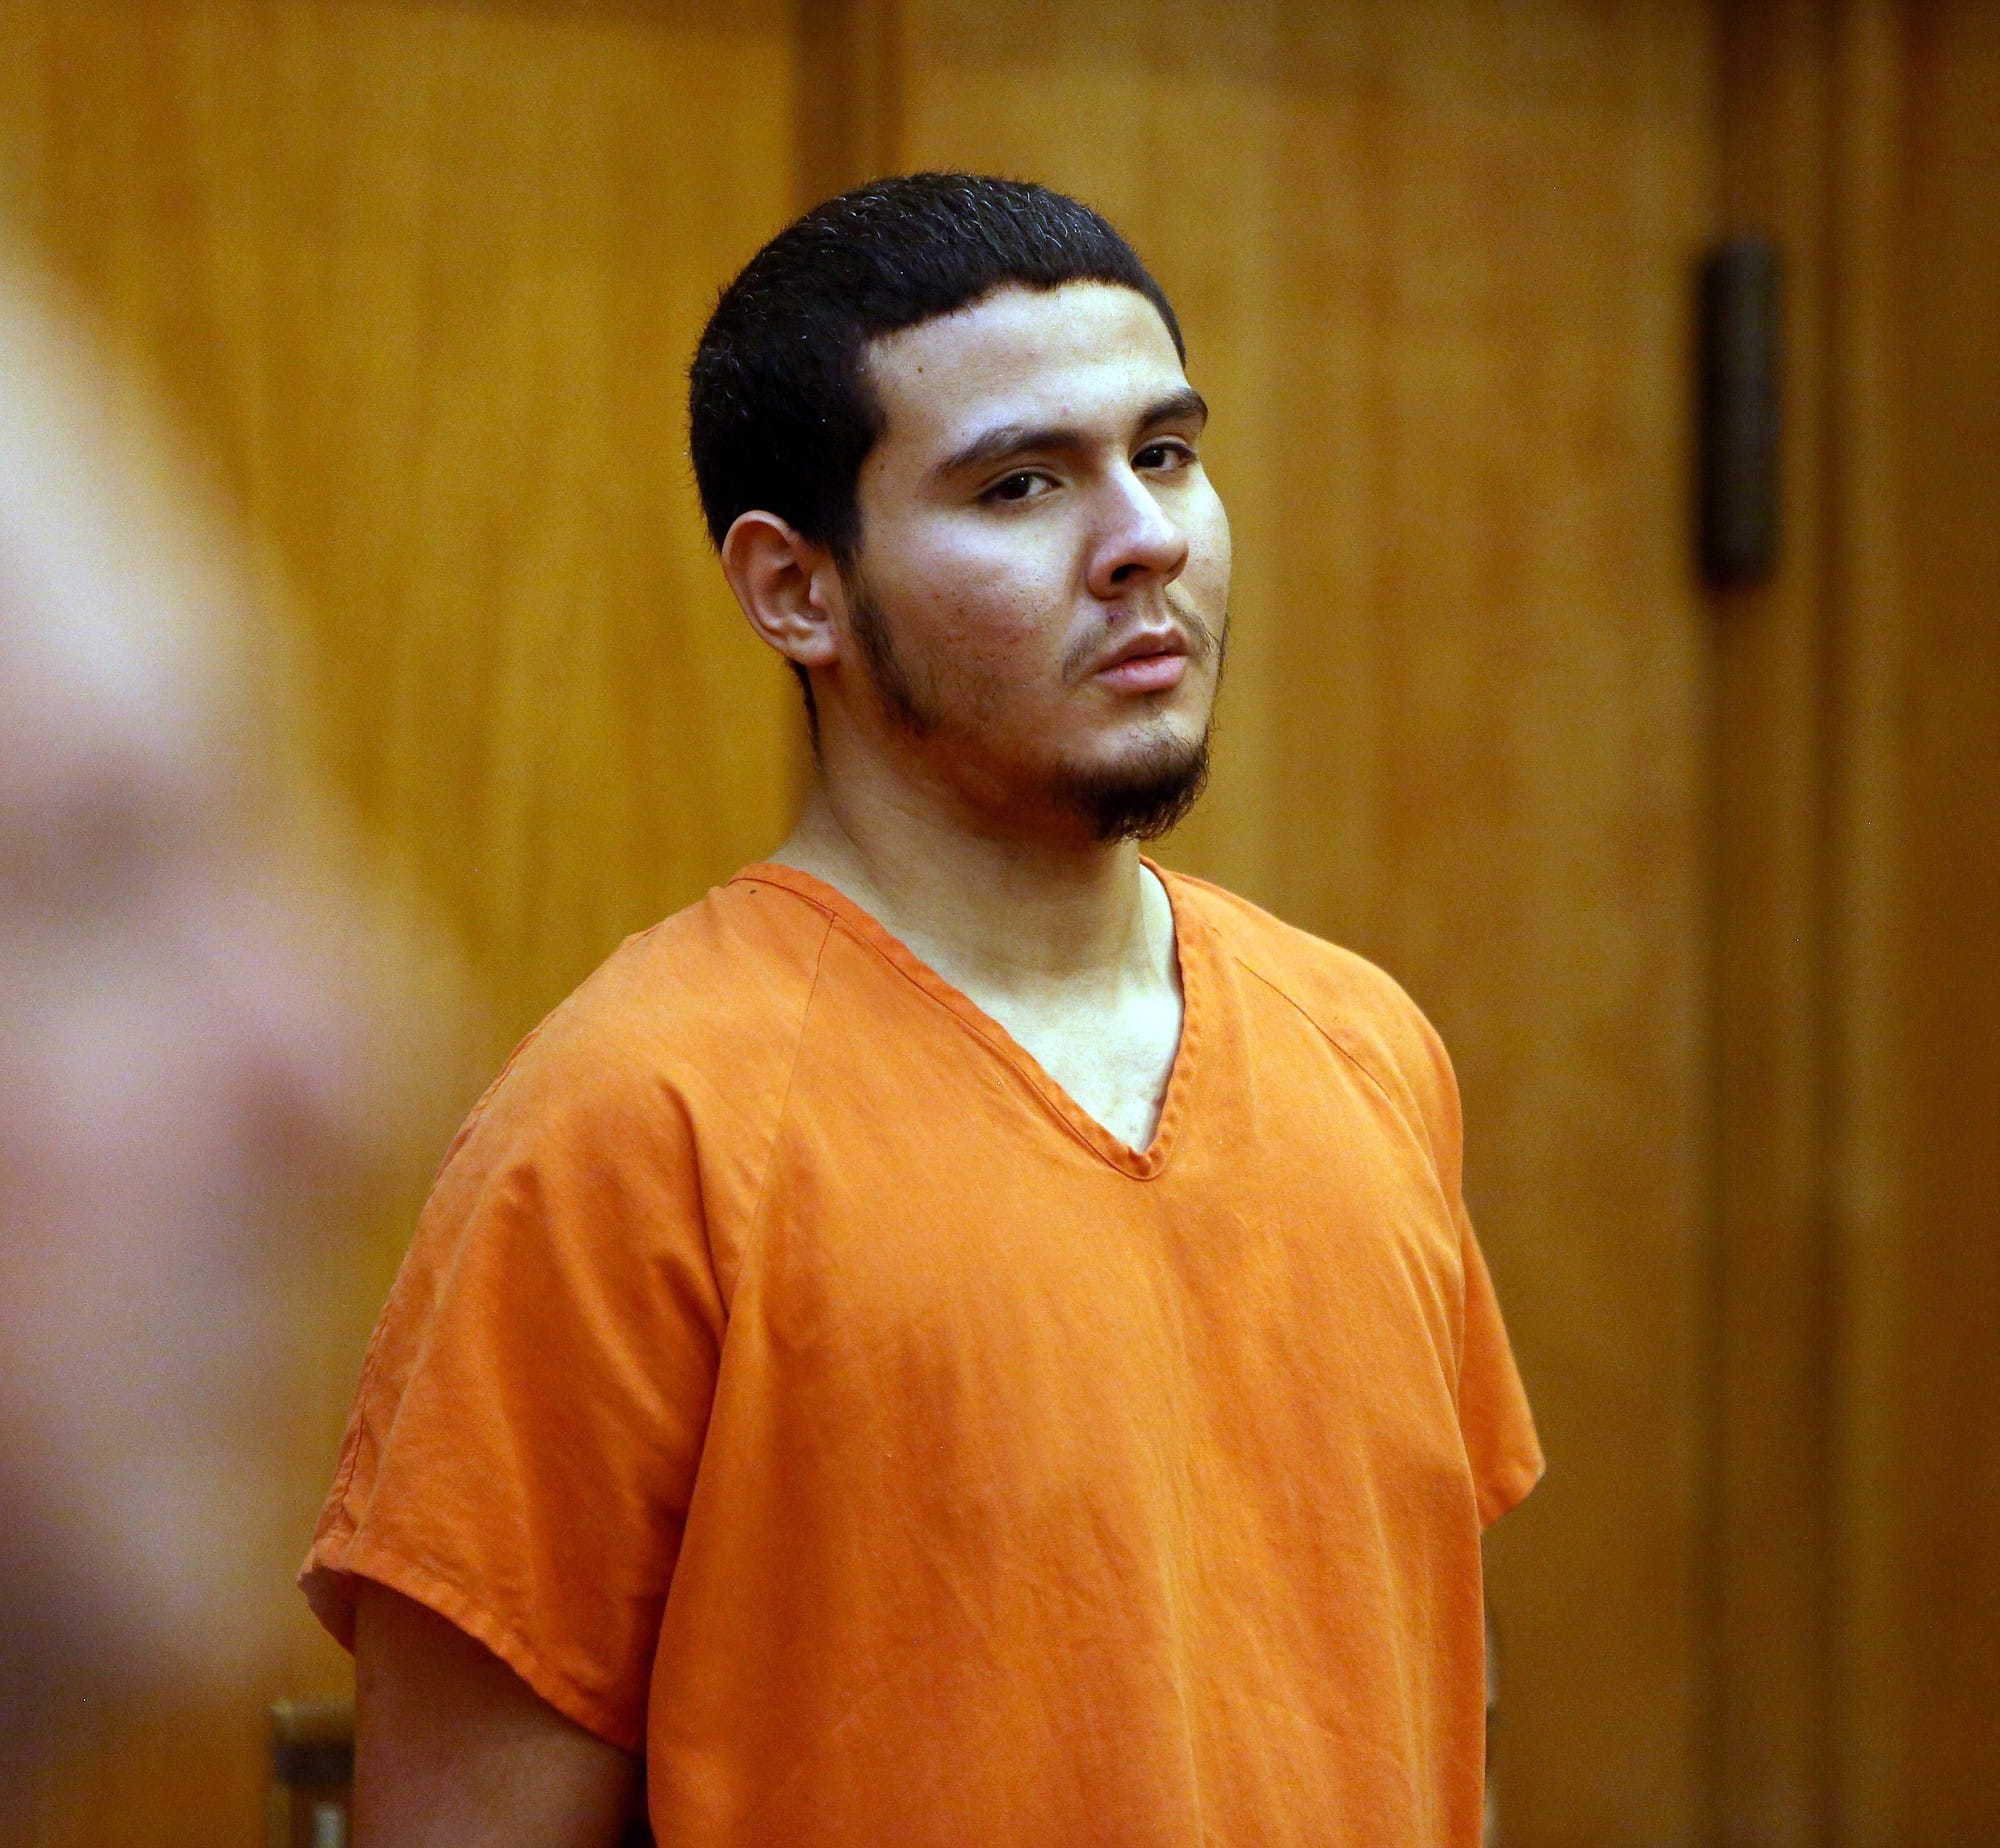 Anthony Rodriguez, 19, appears in criminal court for his arraignment Monday in Miami.